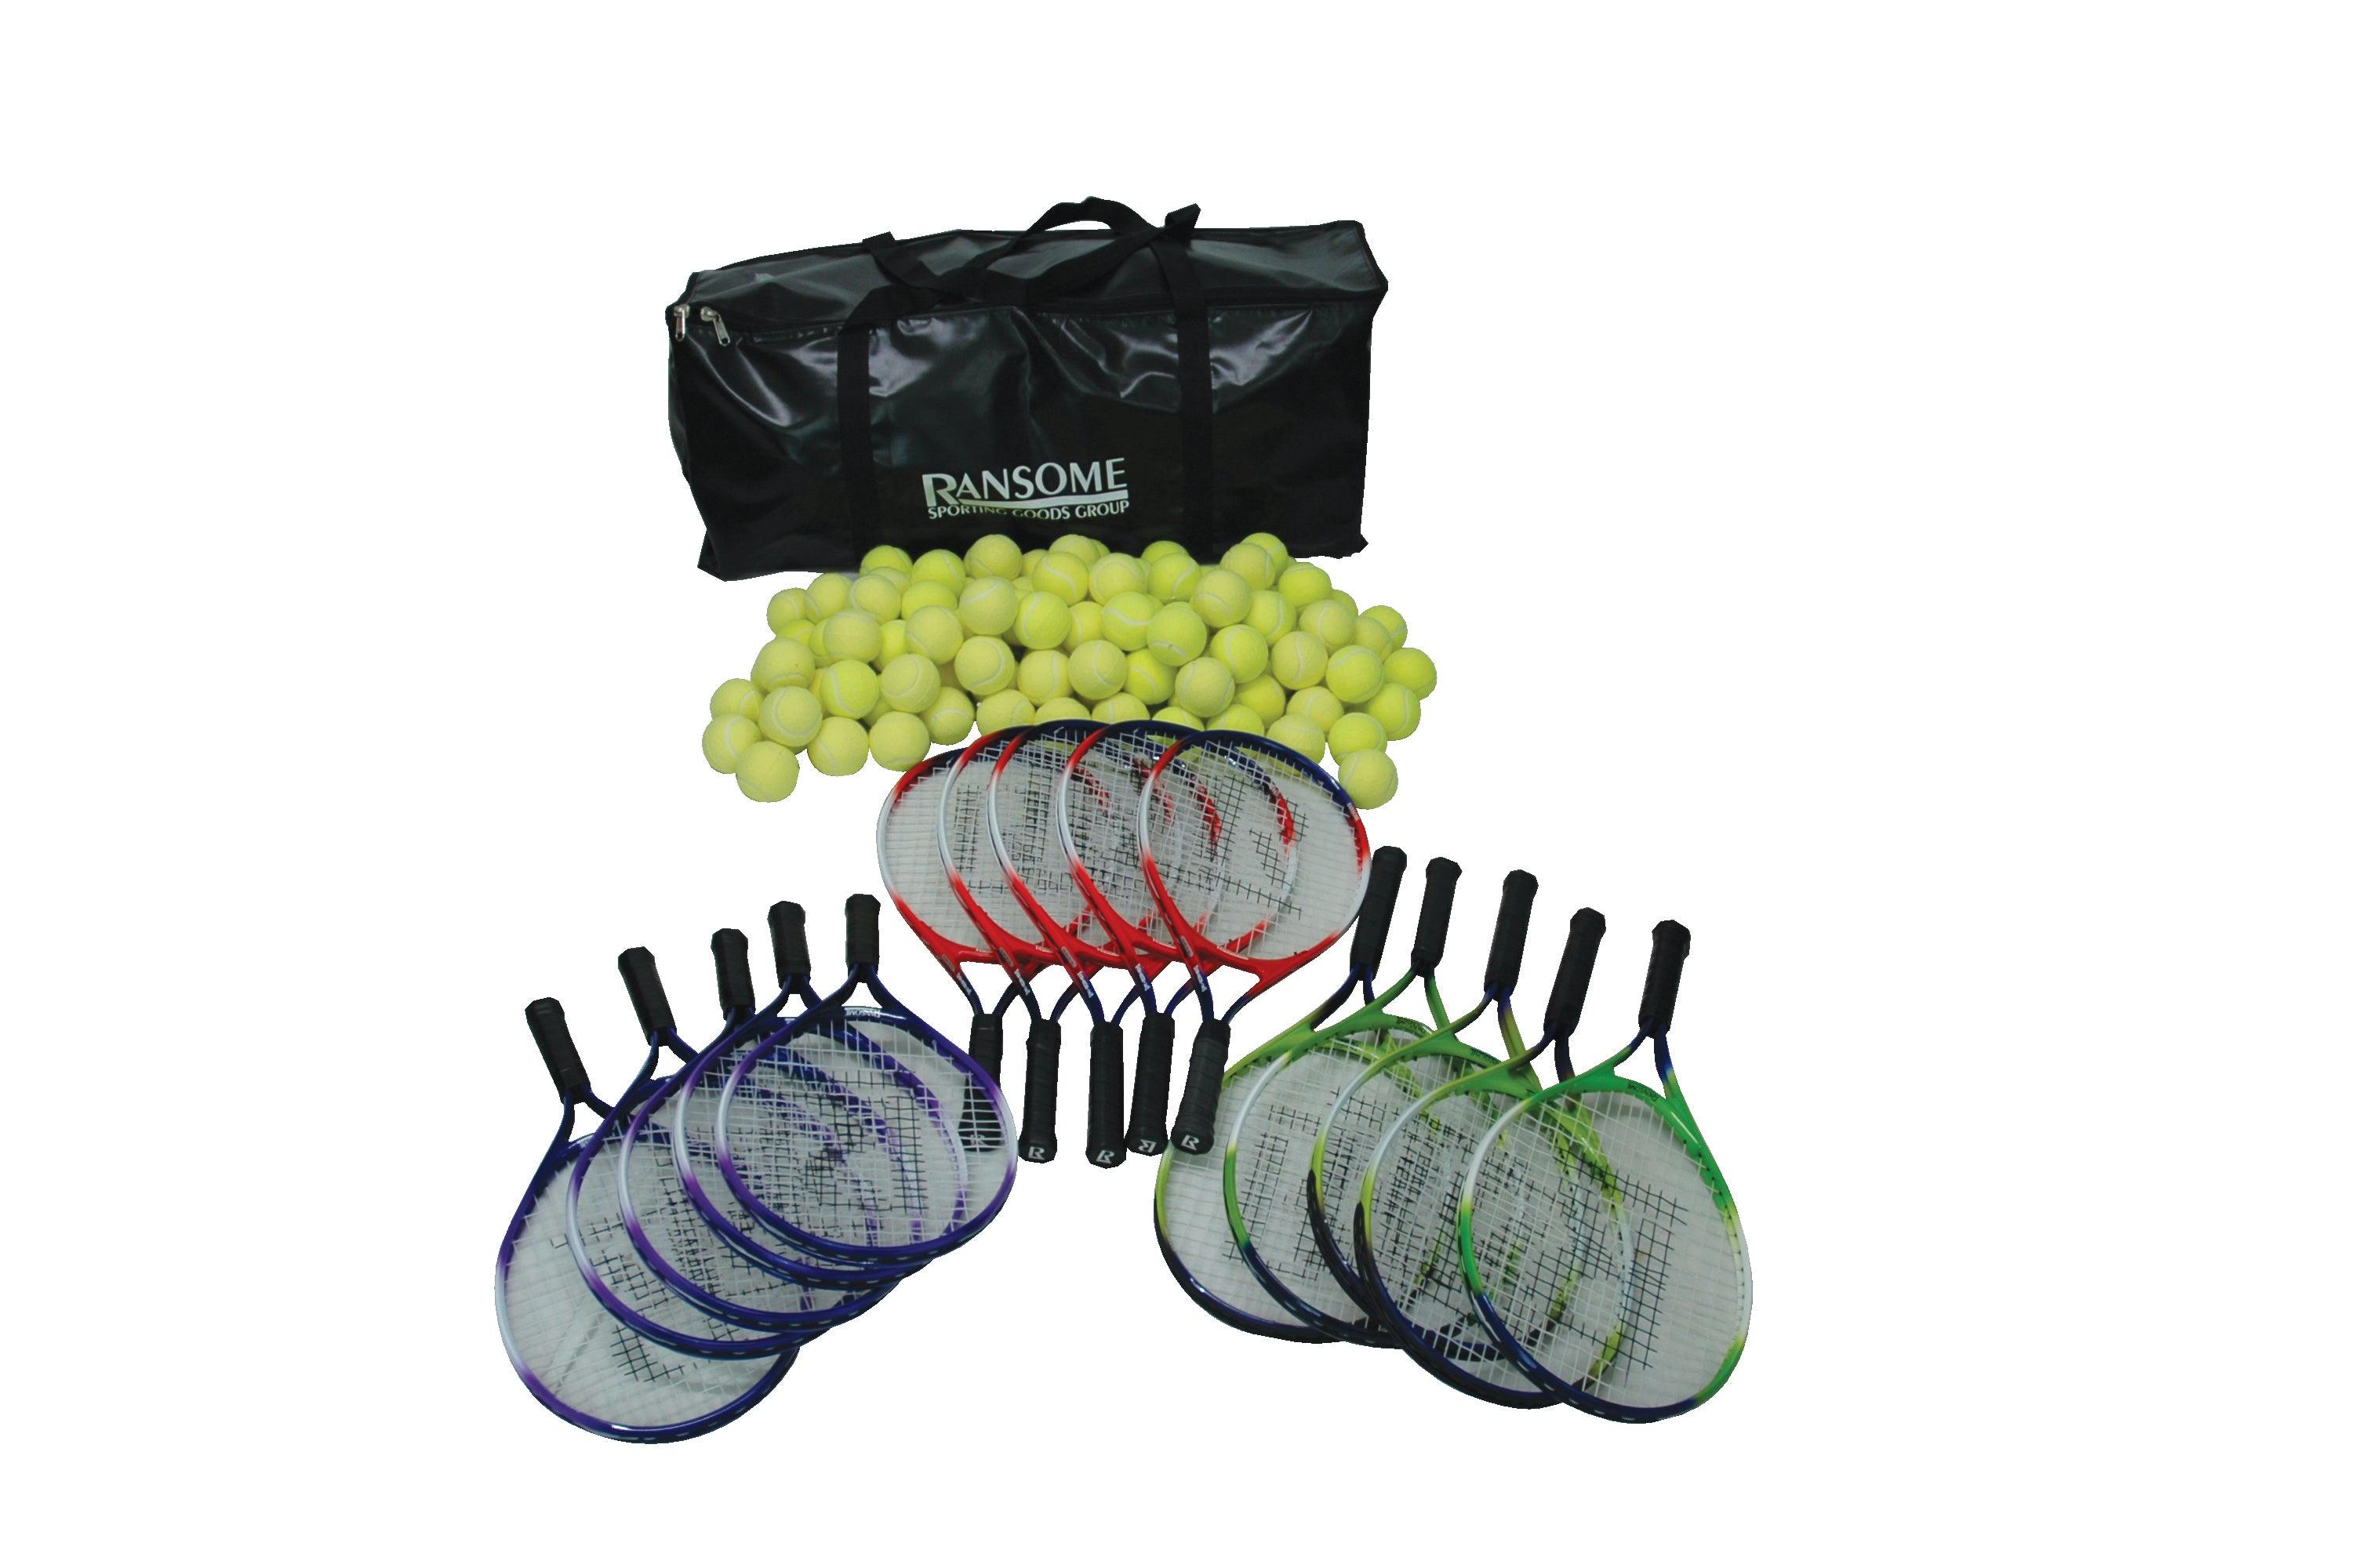 RANSOME Primary Bag (15 Tennis Rackets and 96 balls) - Bassline Retail